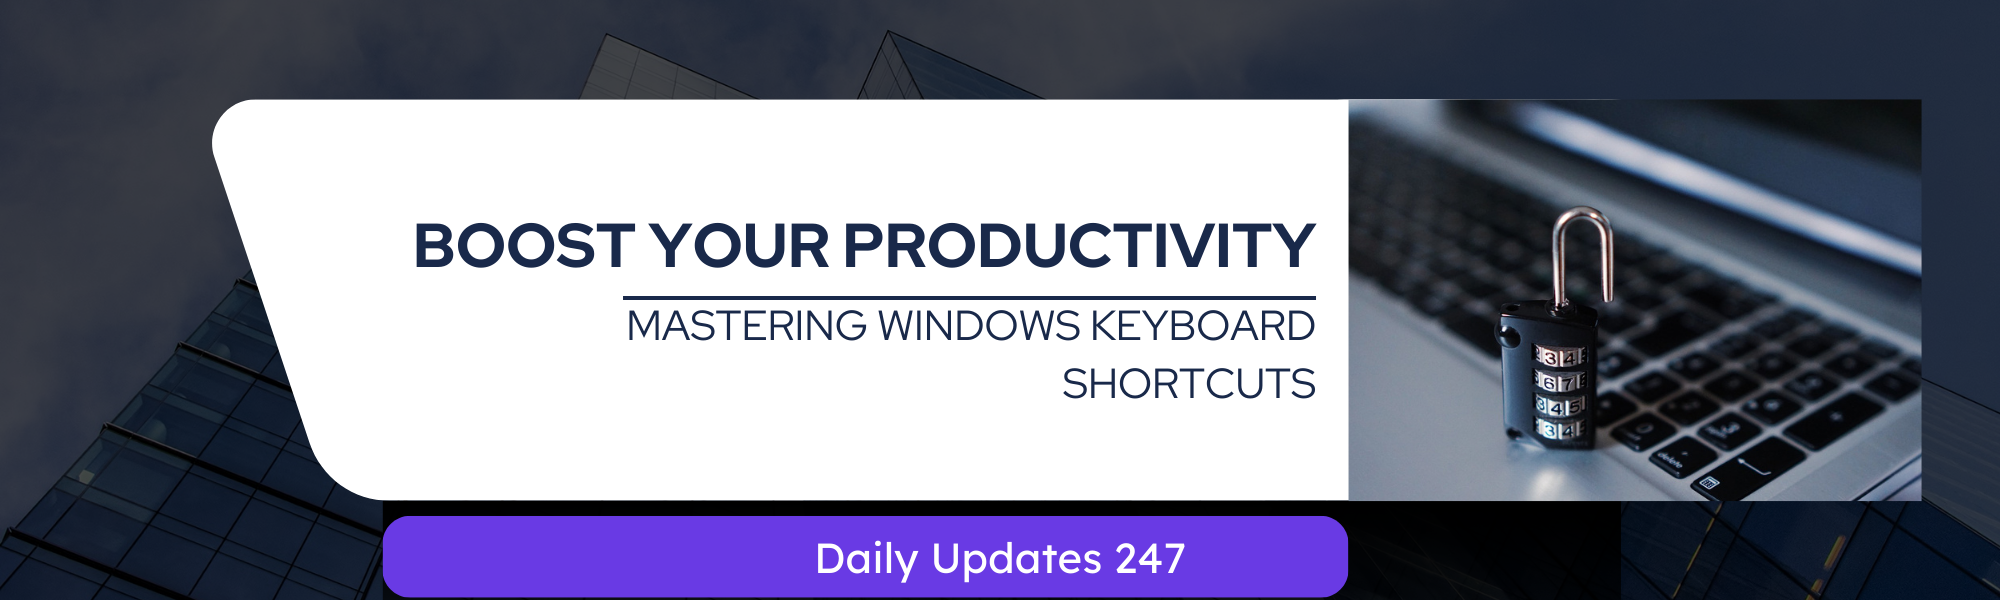 Boost Your Productivity: Mastering Windows Keyboard Shortcuts